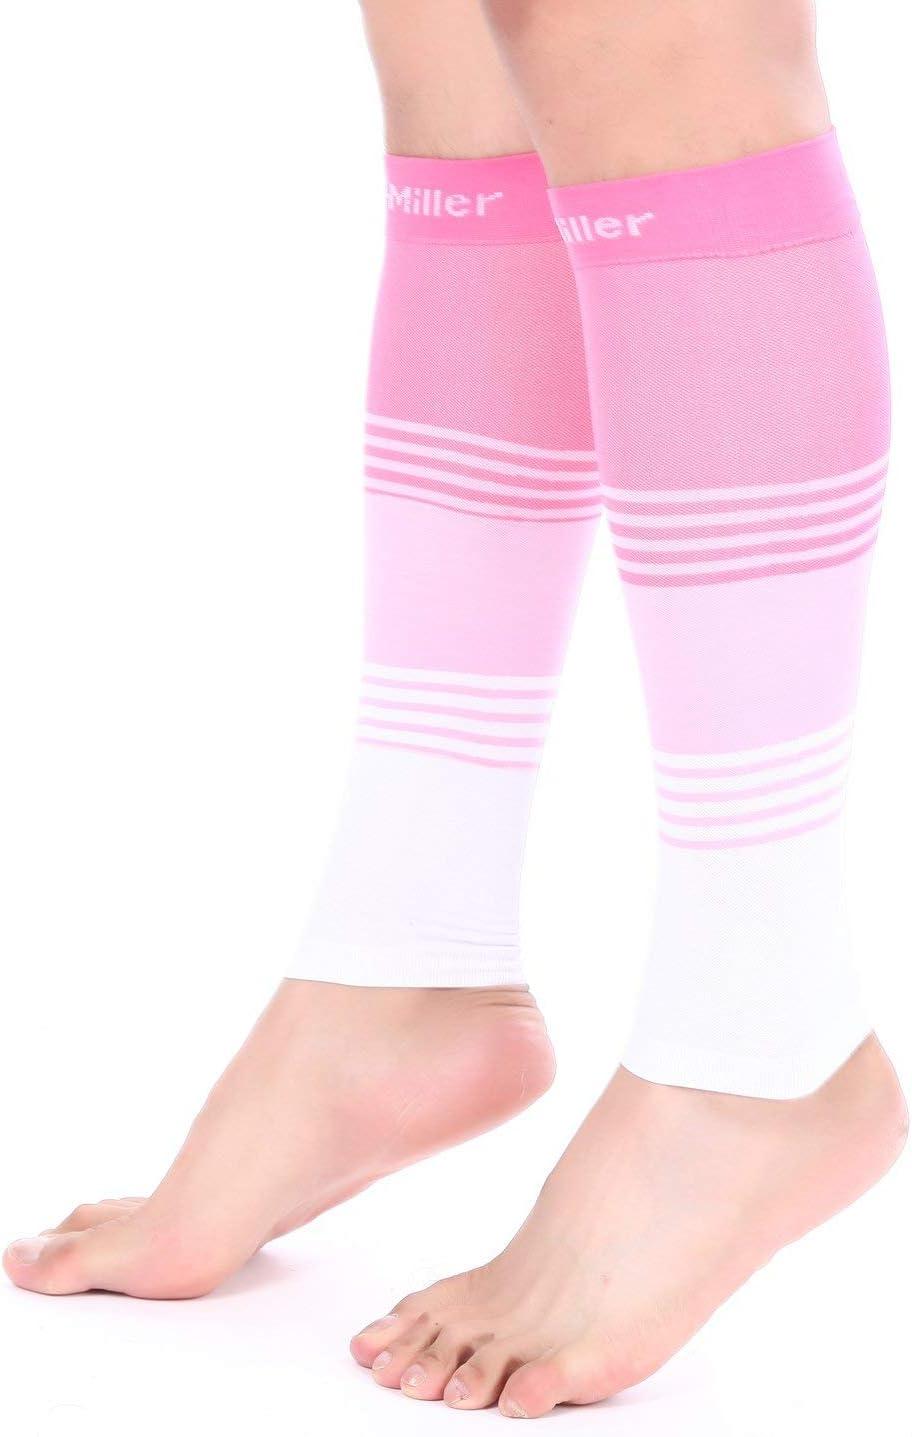 Doc Miller Calf Compression Sleeve Men and Women 20-30 mmHg, Shin Splint  Compression Sleeve, Medical Grade Socks for Varicose Veins and Maternity 1  Pair Large Pink Pink White Calf Sleeve Pink.Pink.White Large